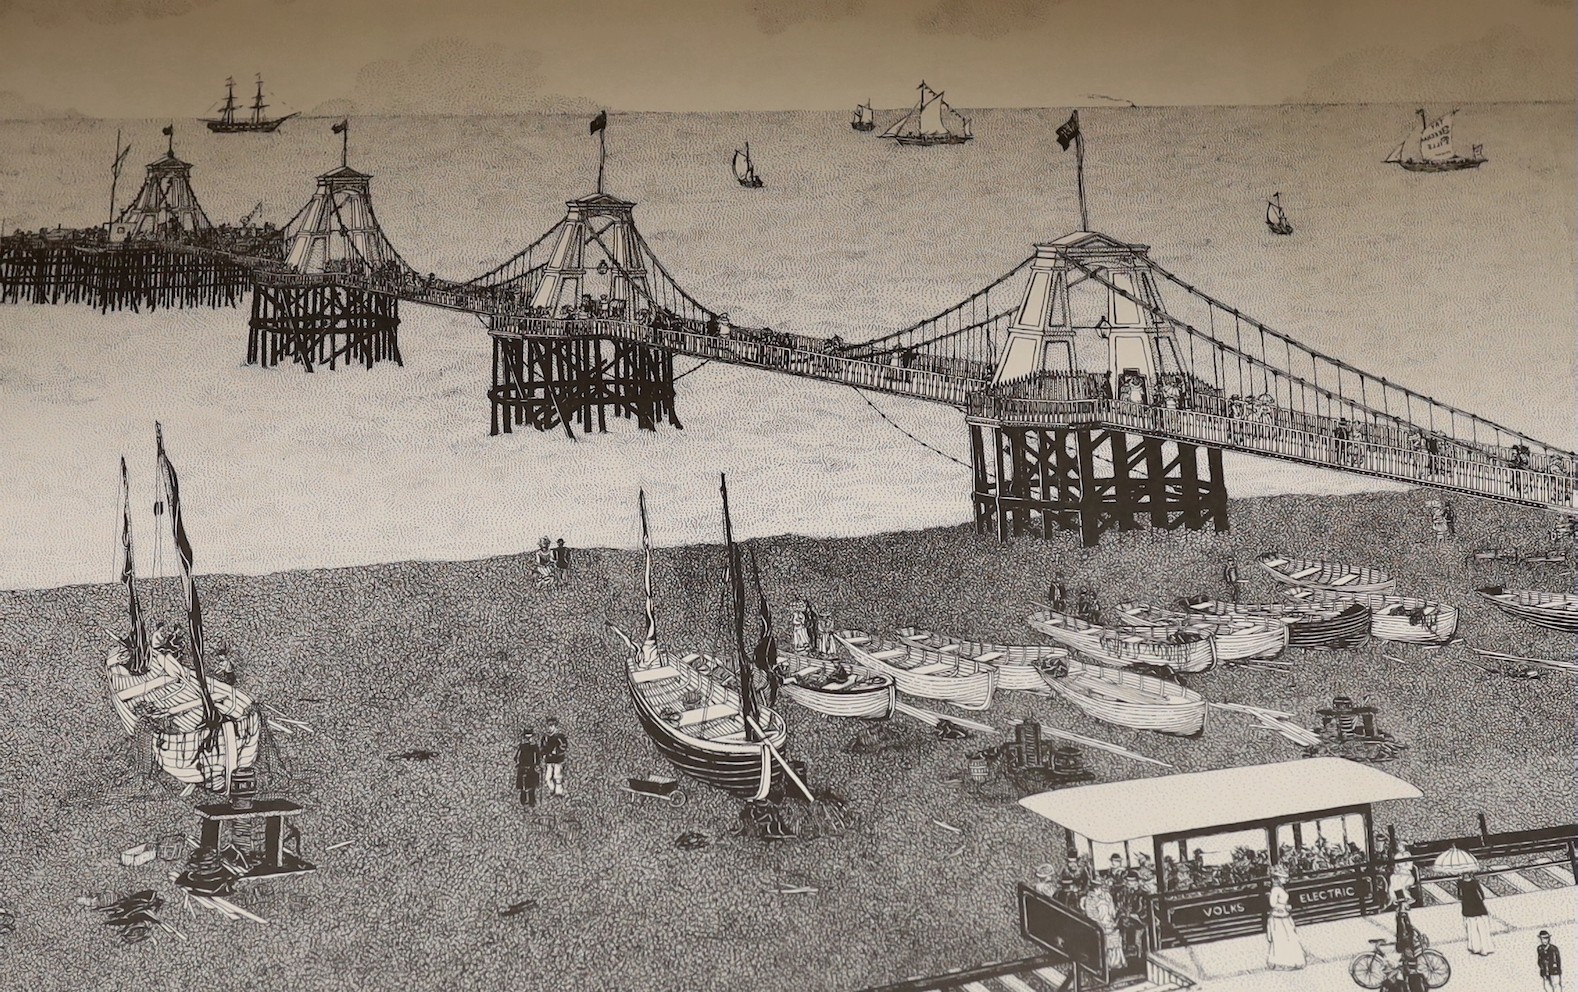 Two prints relating to the old chain pier, Brighton, by Laurie Williams and Francis Frith together with two related books